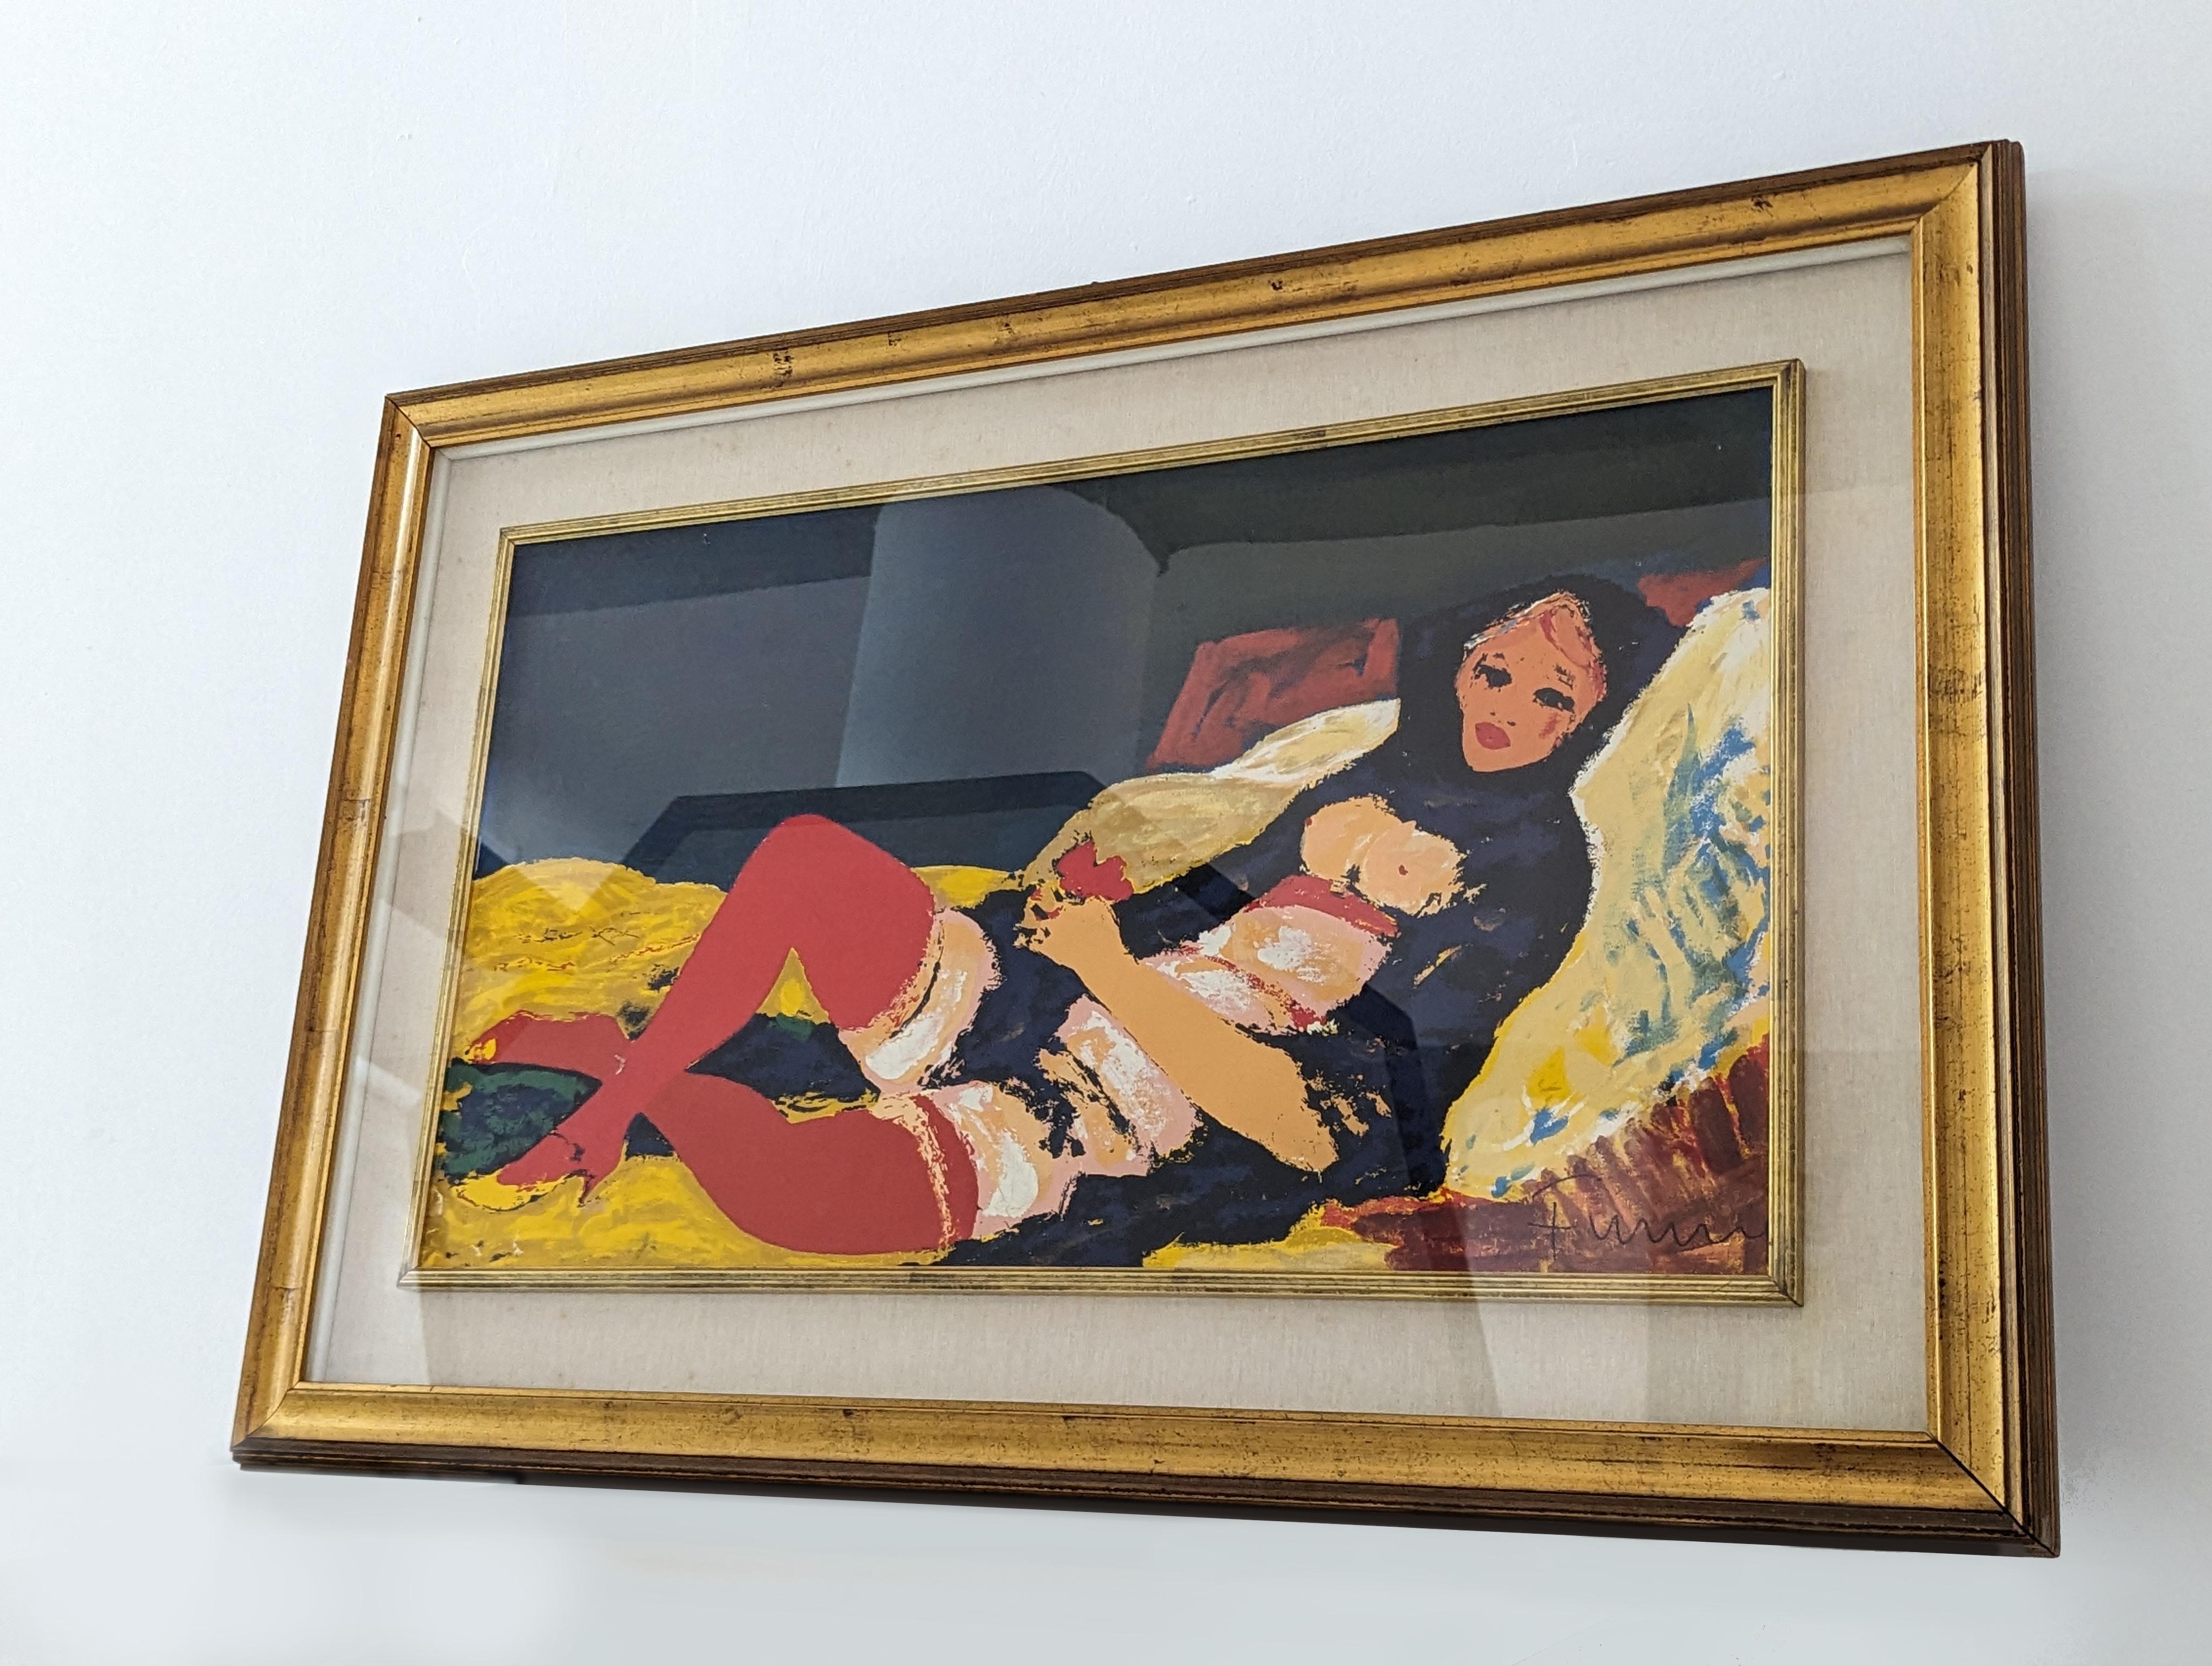 Portrait of a young woman titled Odalisque, silk-screened work of art on canvas made by Salvatore Fiume in the 70s. Signed in one corner and written proof of authorship on the back. Salvatore Fiume (1915 - 1997) was an Italian painter, sculptor,